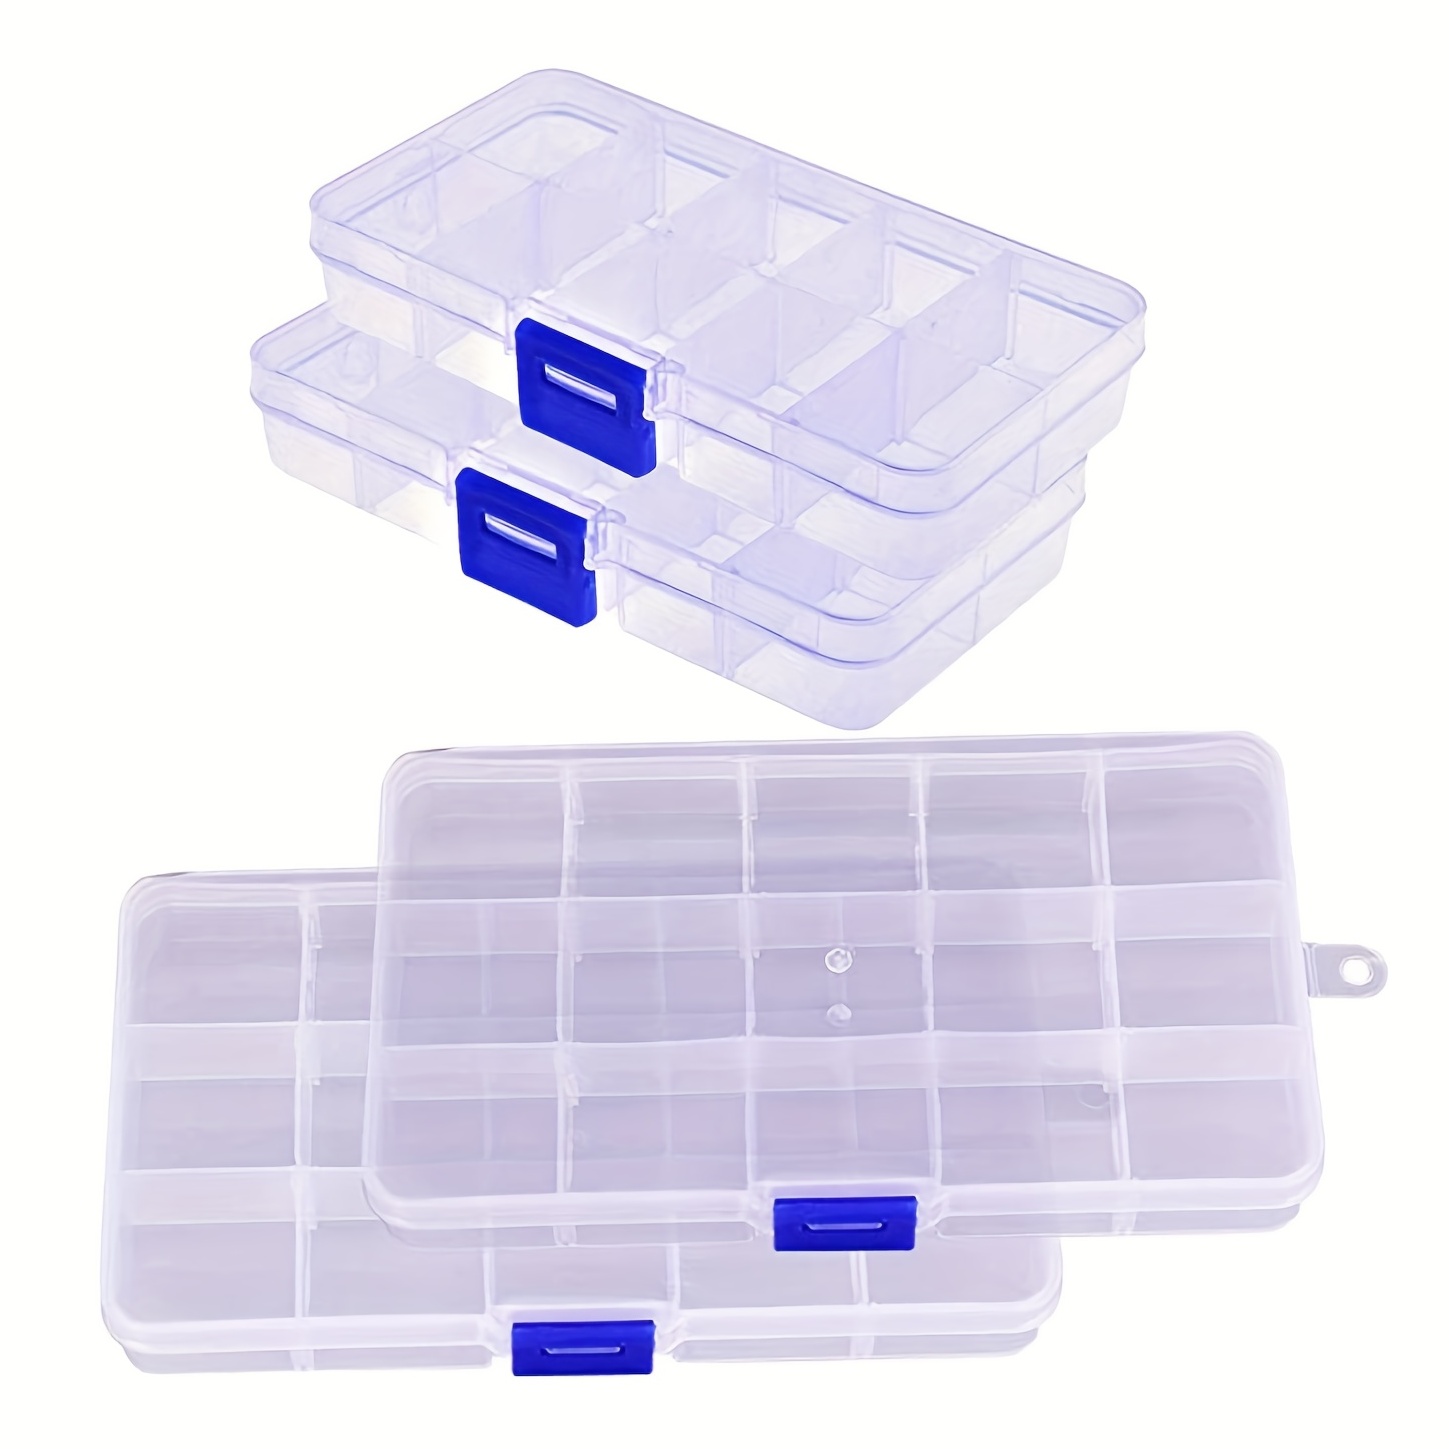 

4pcs Travel-friendly Clear Plastic Bead Storage Container With 10/15 Grids - Perfect For Organizing Jewelry, Rings, And Small Parts